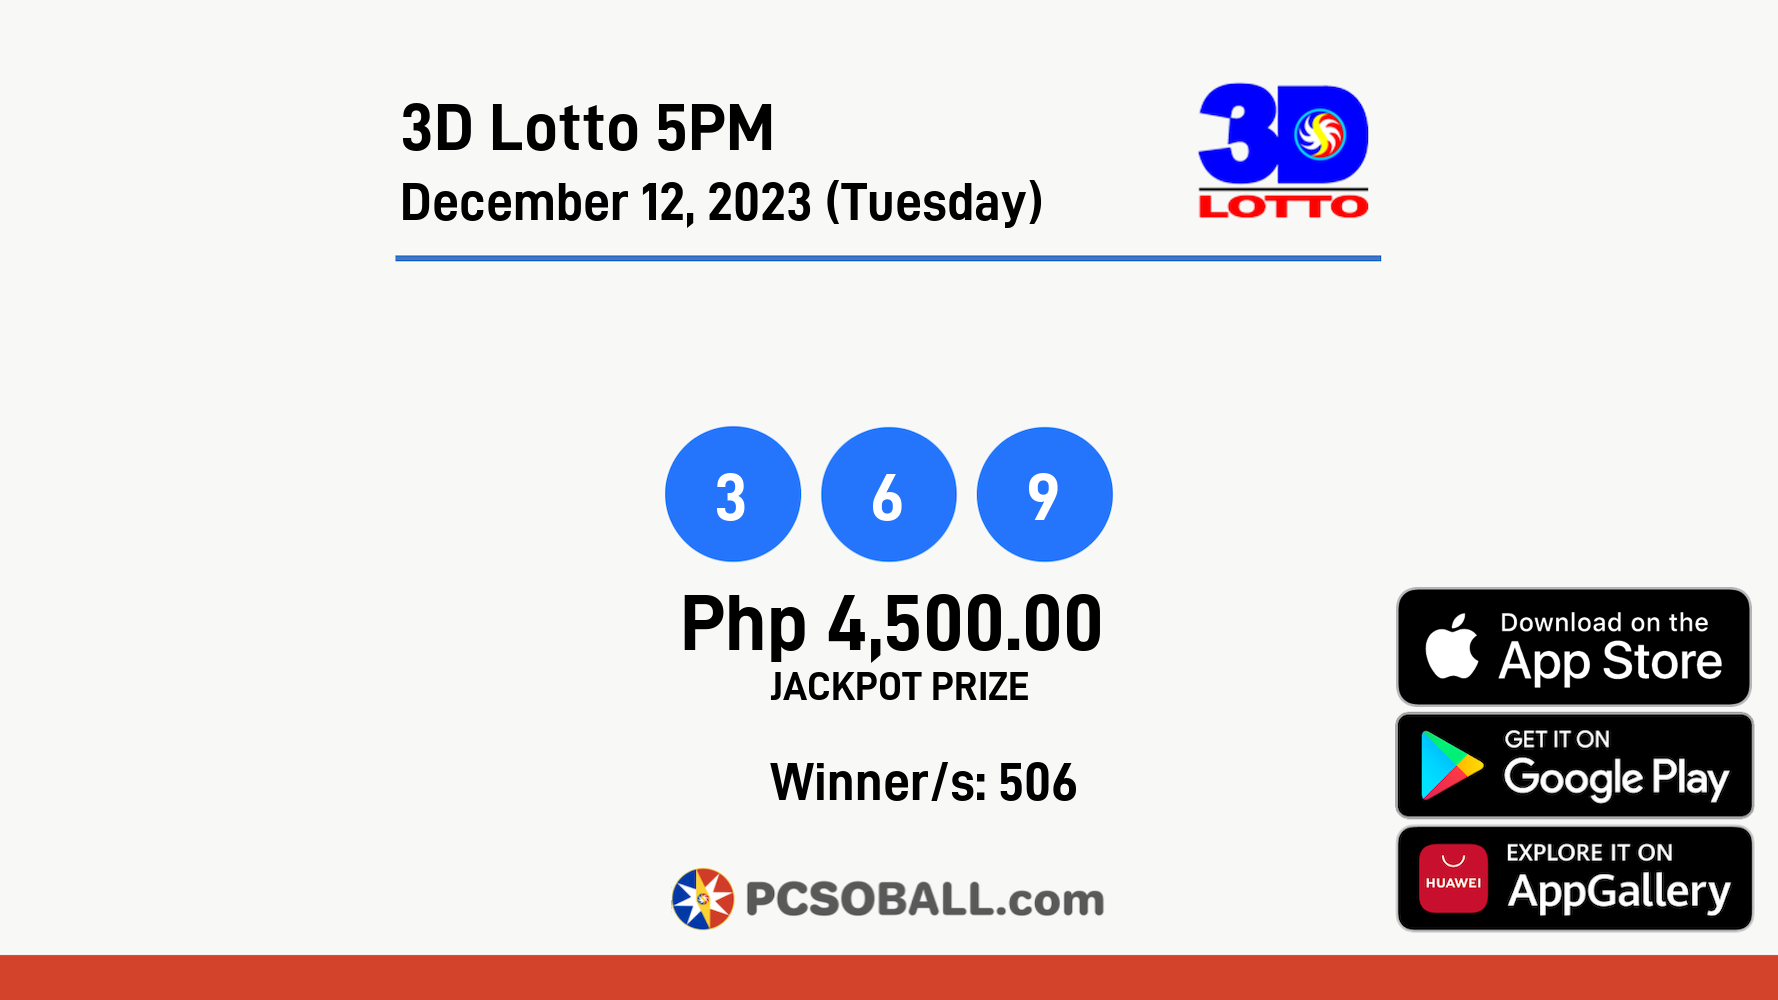 3D Lotto 5PM December 12, 2023 (Tuesday) Result